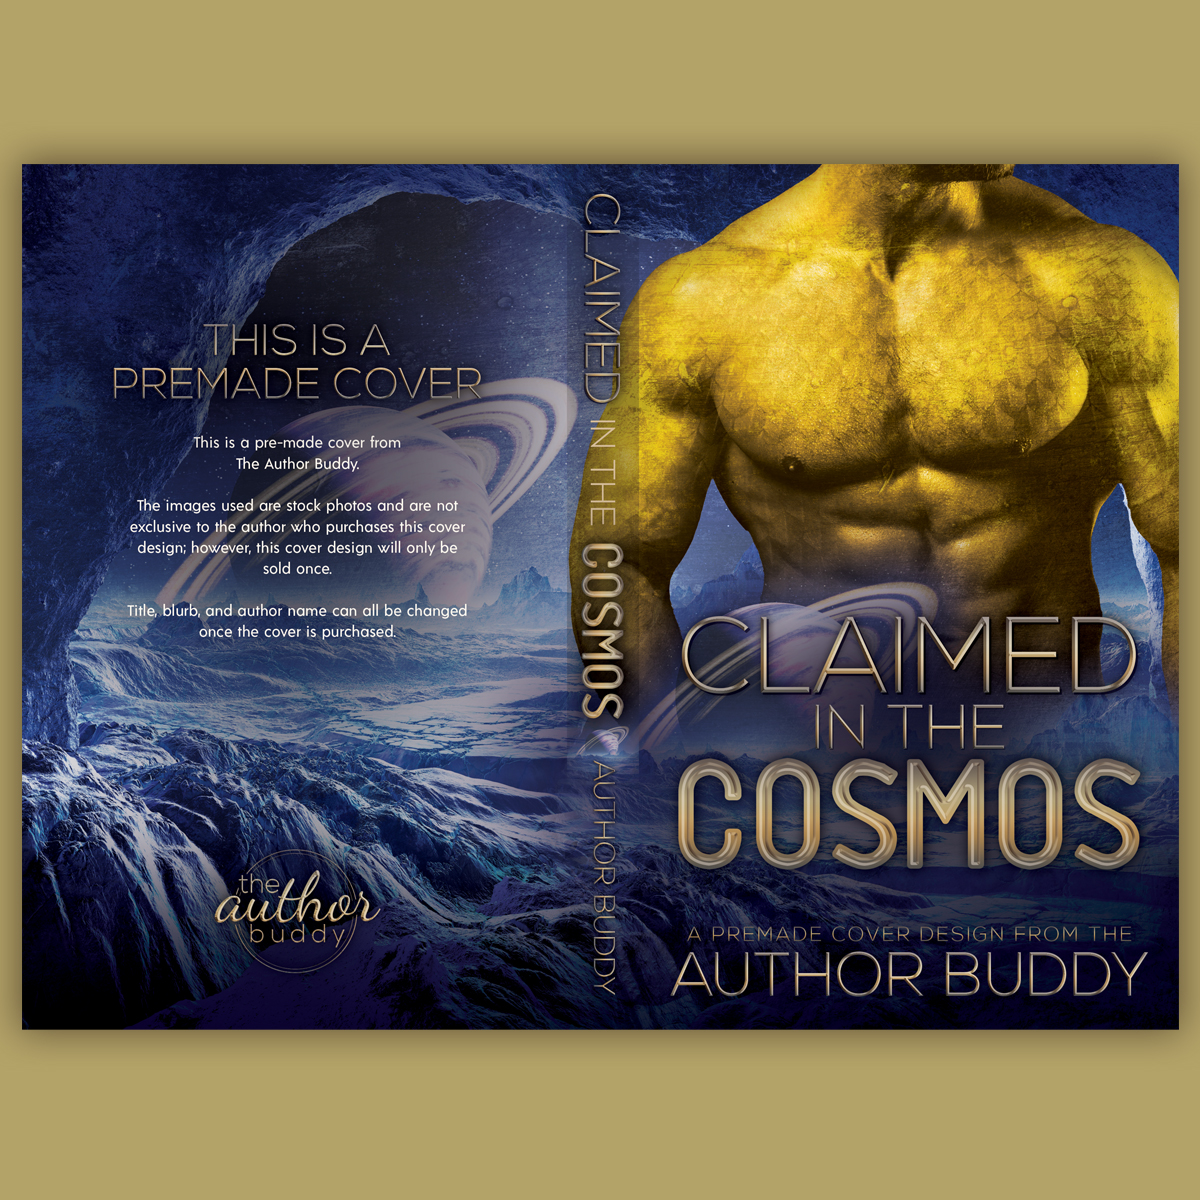 Claimed In The Cosmos - Premade Sci-Fi Romance Book Cover from The Author Buddy